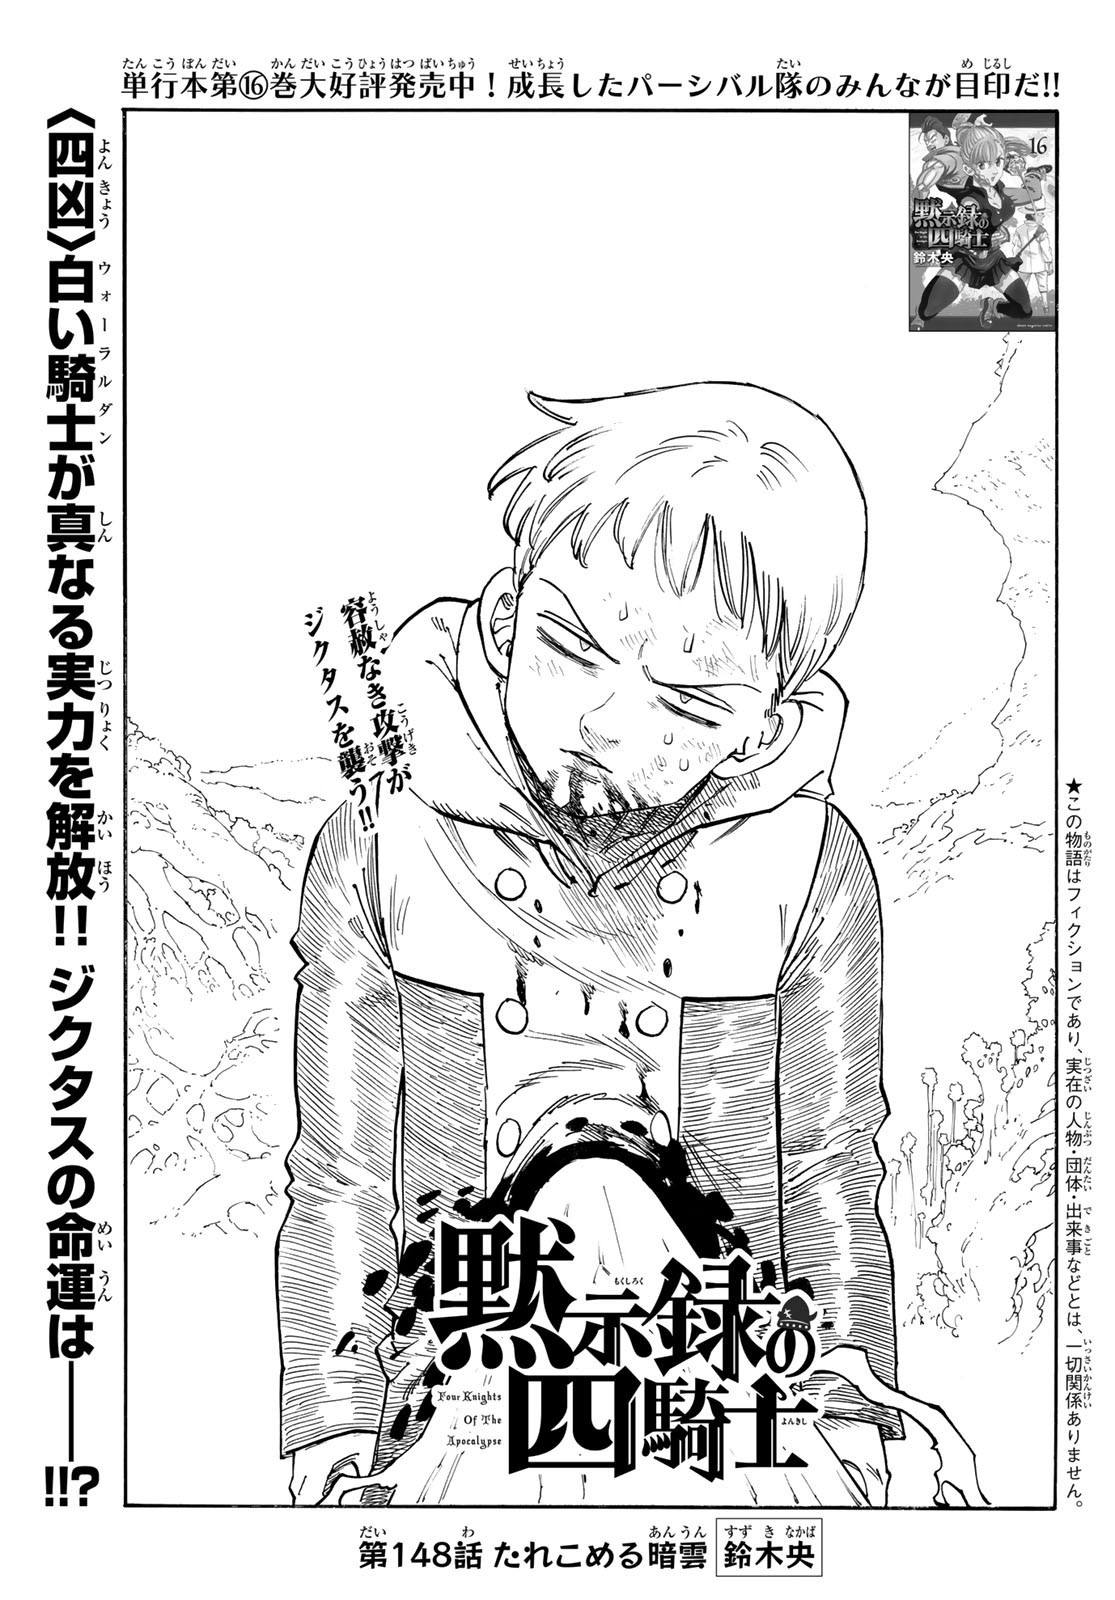 Weekly Shōnen Magazine - 週刊少年マガジン - Chapter 2024-23 - Page 89